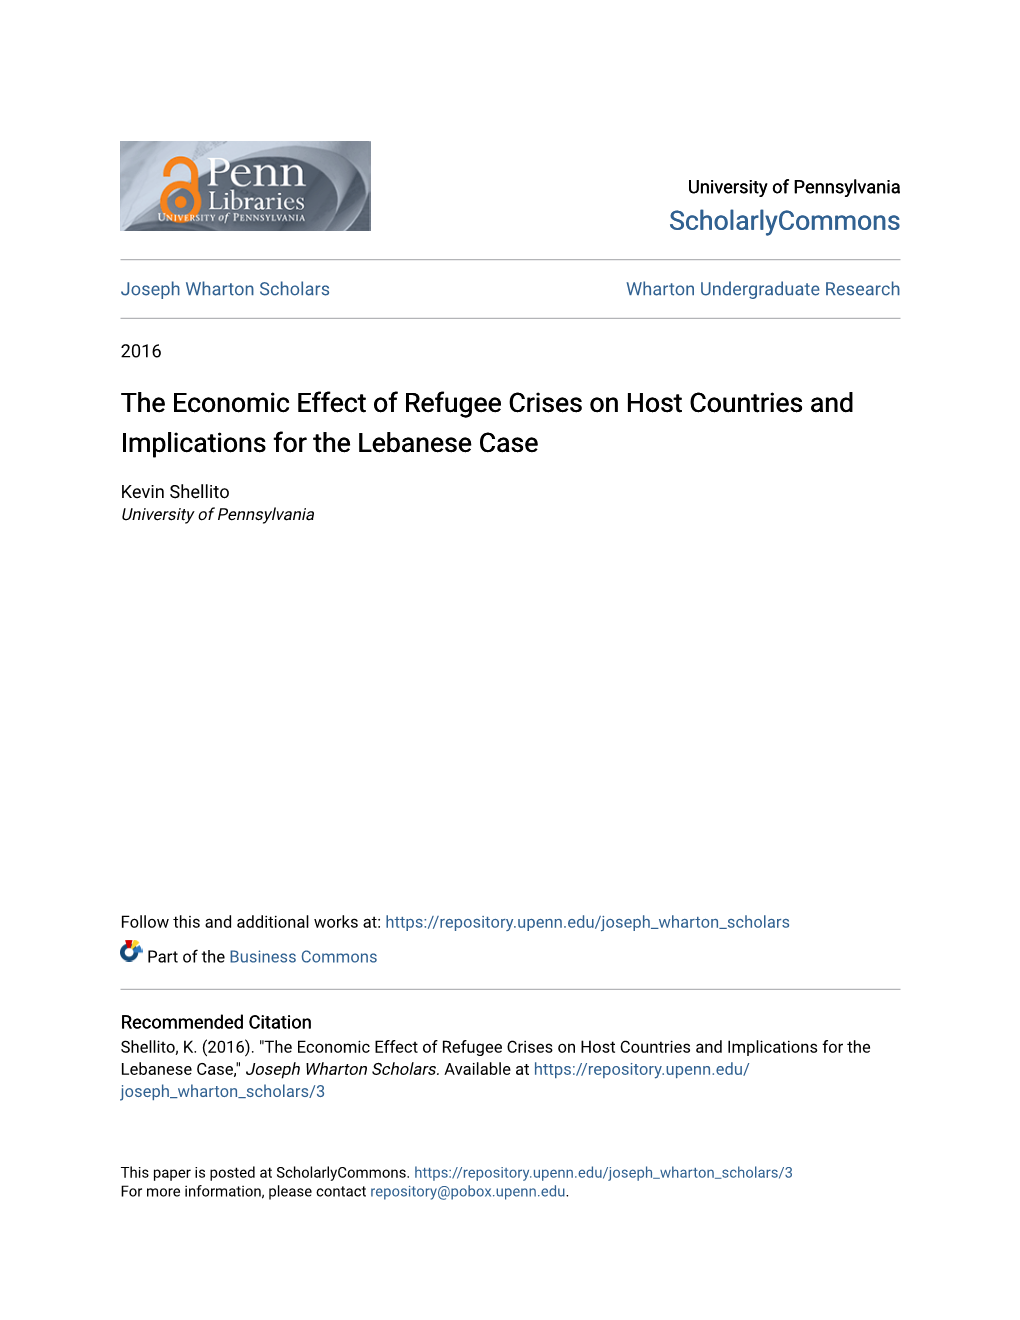 The Economic Effect of Refugee Crises on Host Countries and Implications for the Lebanese Case